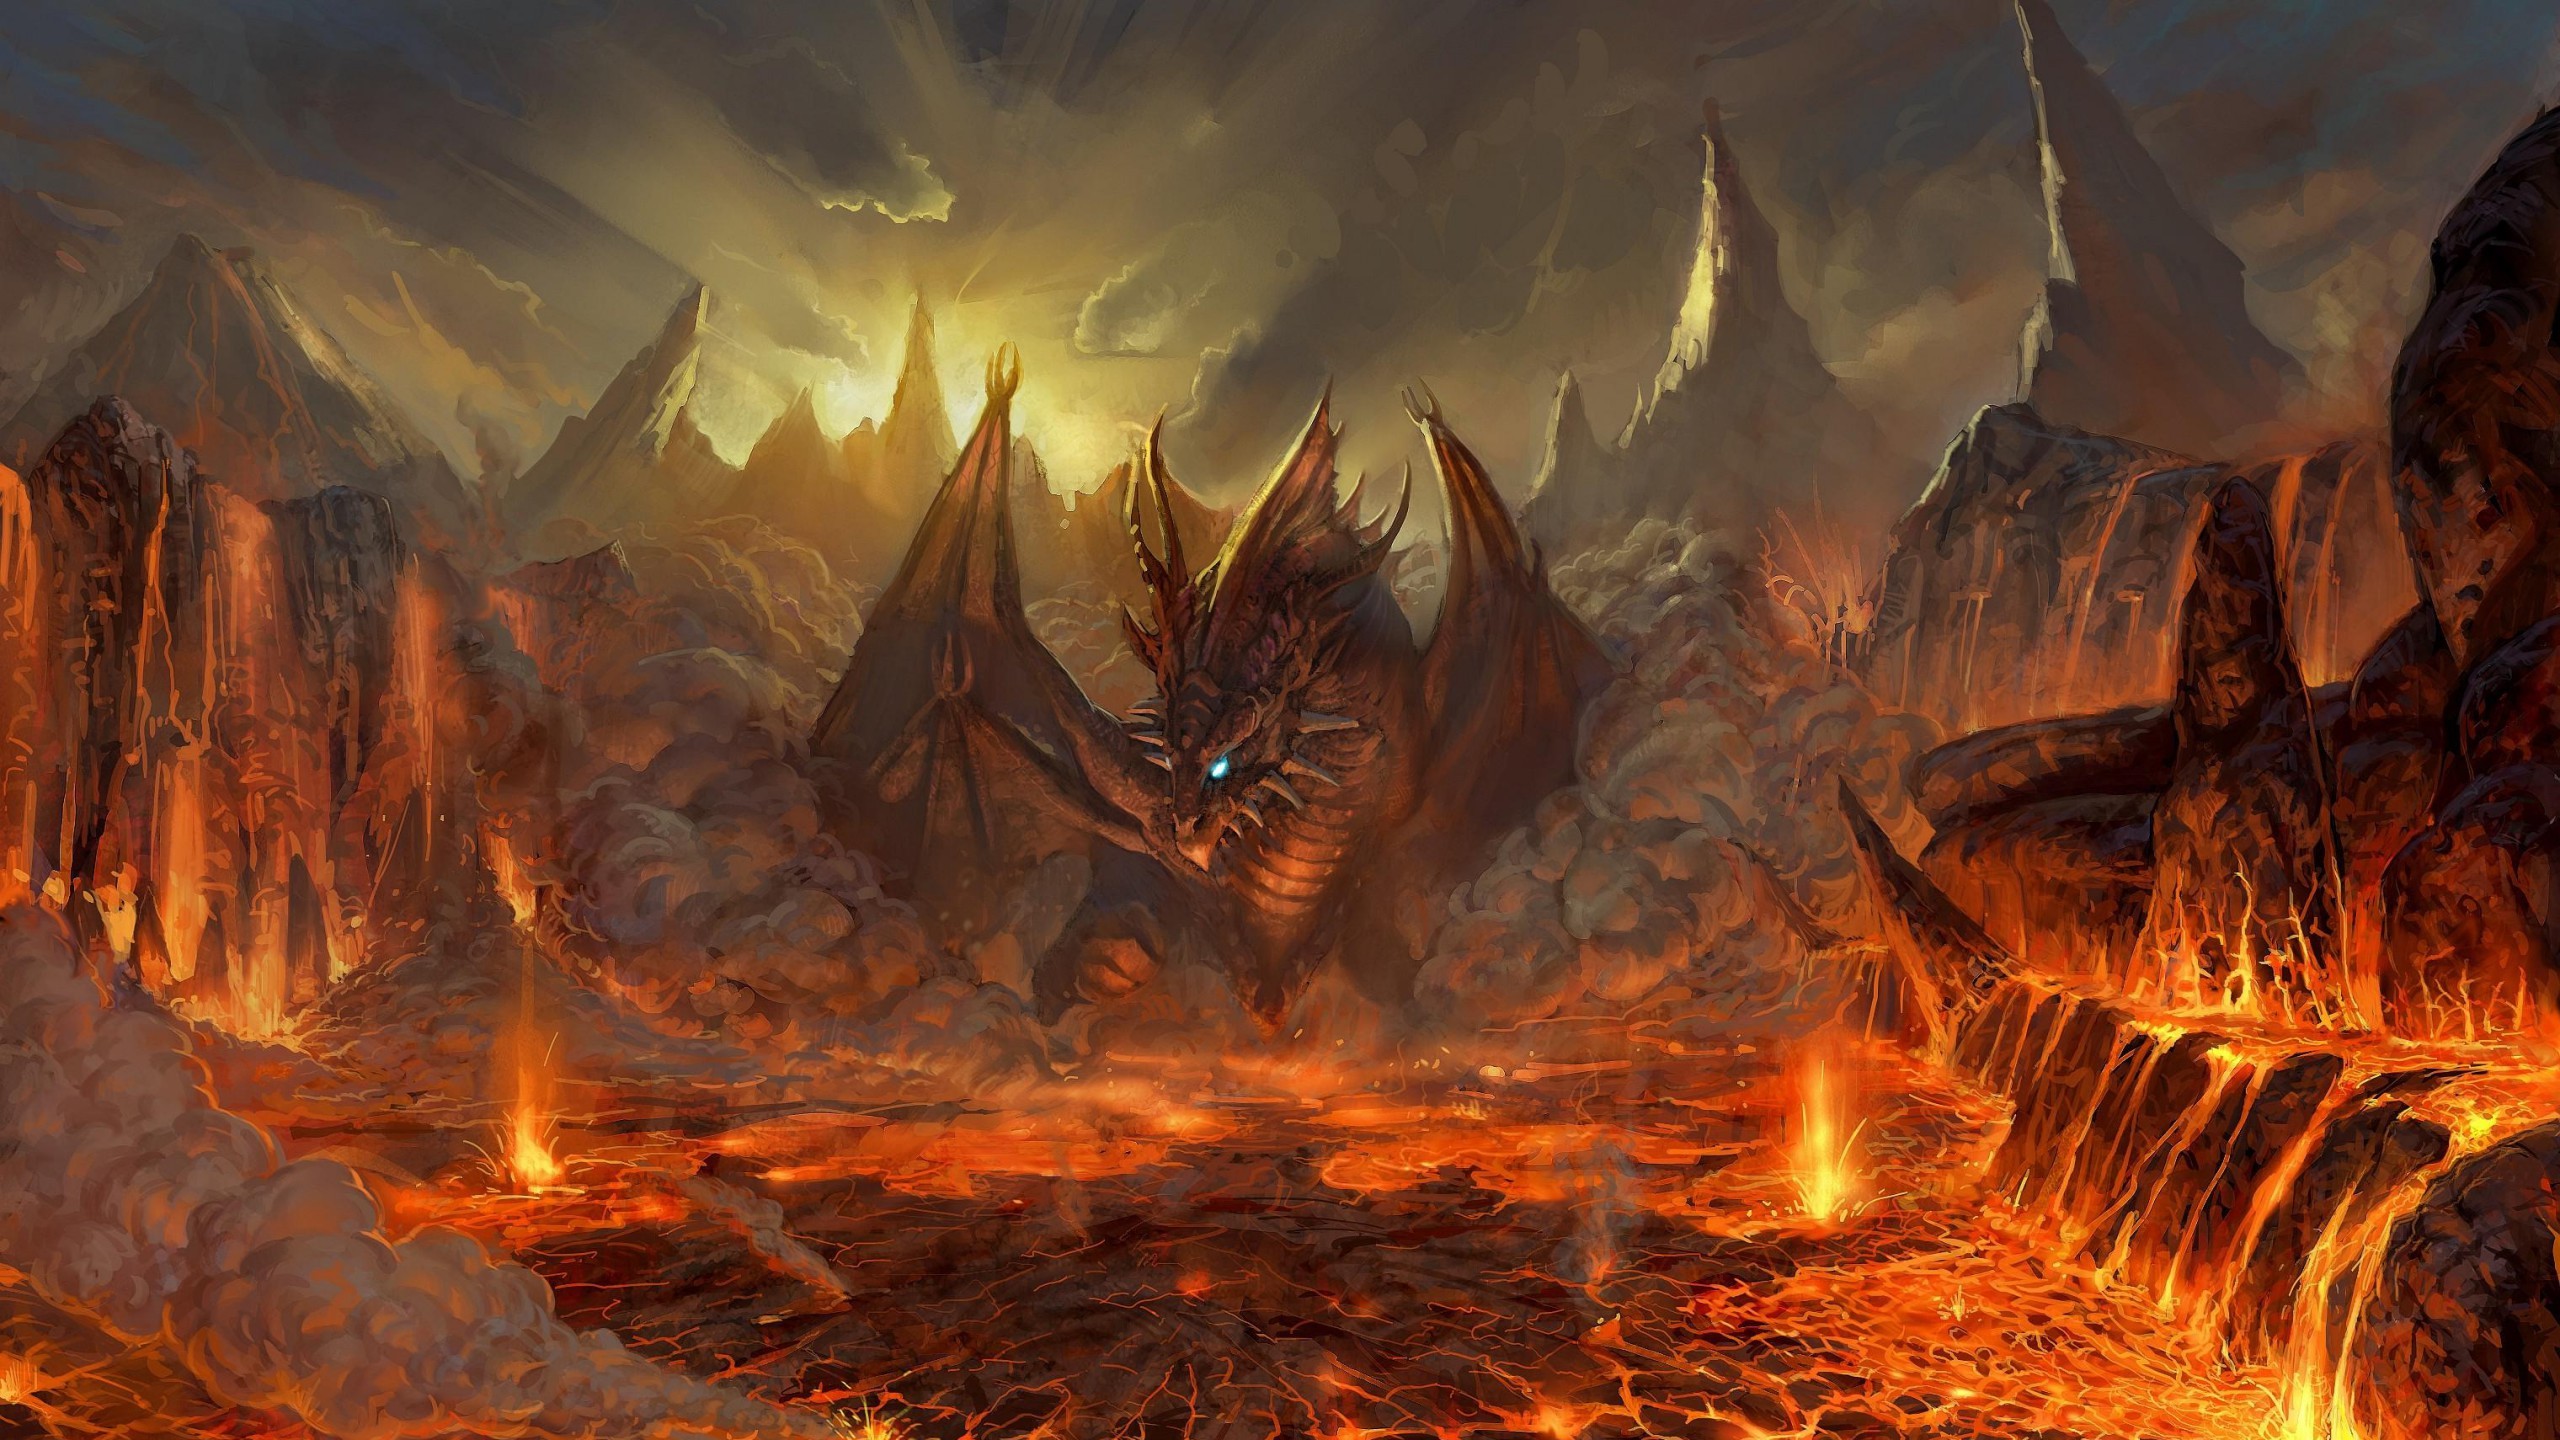 2560x1440 Fire Dragon Wallpapers Desktop Background with High Resolution Wallpaper   px 746.10 KB